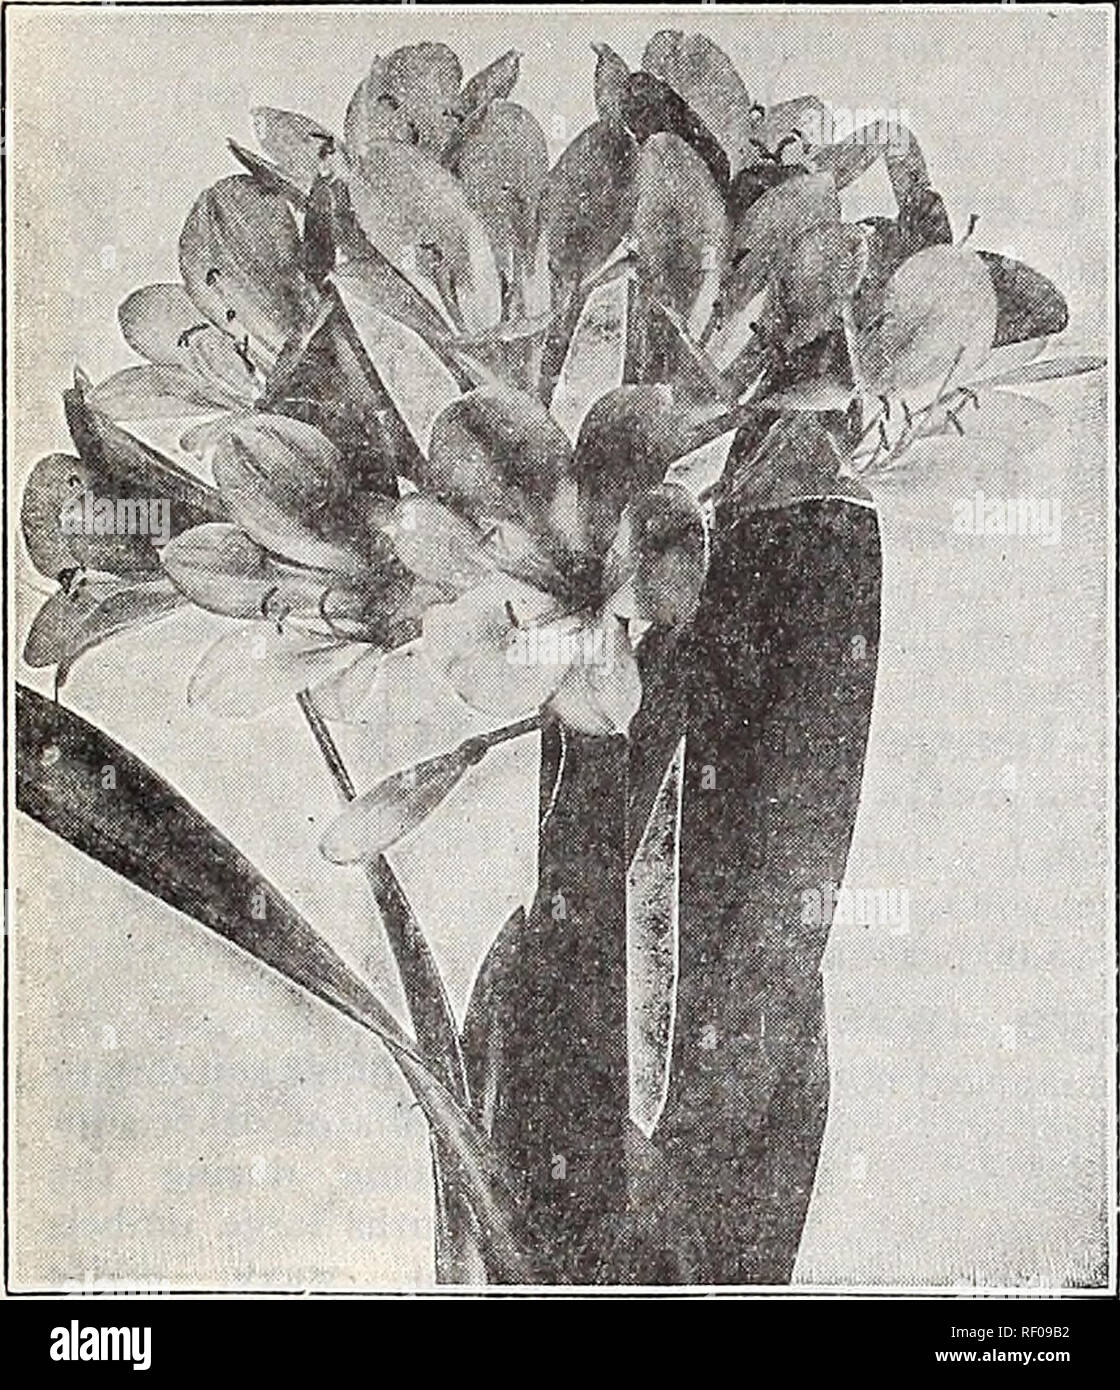 . Dreer's midsummer list 1932. Flowers Seeds Catalogs; Fruit Seeds Catalogs; Vegetables Seeds Catalogs; Nurseries (Horticulture) Catalogs; Gardening Equipment and supplies Catalogs. DECORATIVE AND FLOWERING PLANTS FOR HOUSE AND CONSERVATORY 25. Clivia Miniata Beloperone Guttata A singularly attractive novel- ty. The inflorescence of Belo- perone is composed of a series of overlapping bracts or floral leaves, these bracts assuming a rich golden bronze tint when the plant is exposed to full light, and the two-lipped white flow- ers are produced successively between these bracts. The lower lip of Stock Photo